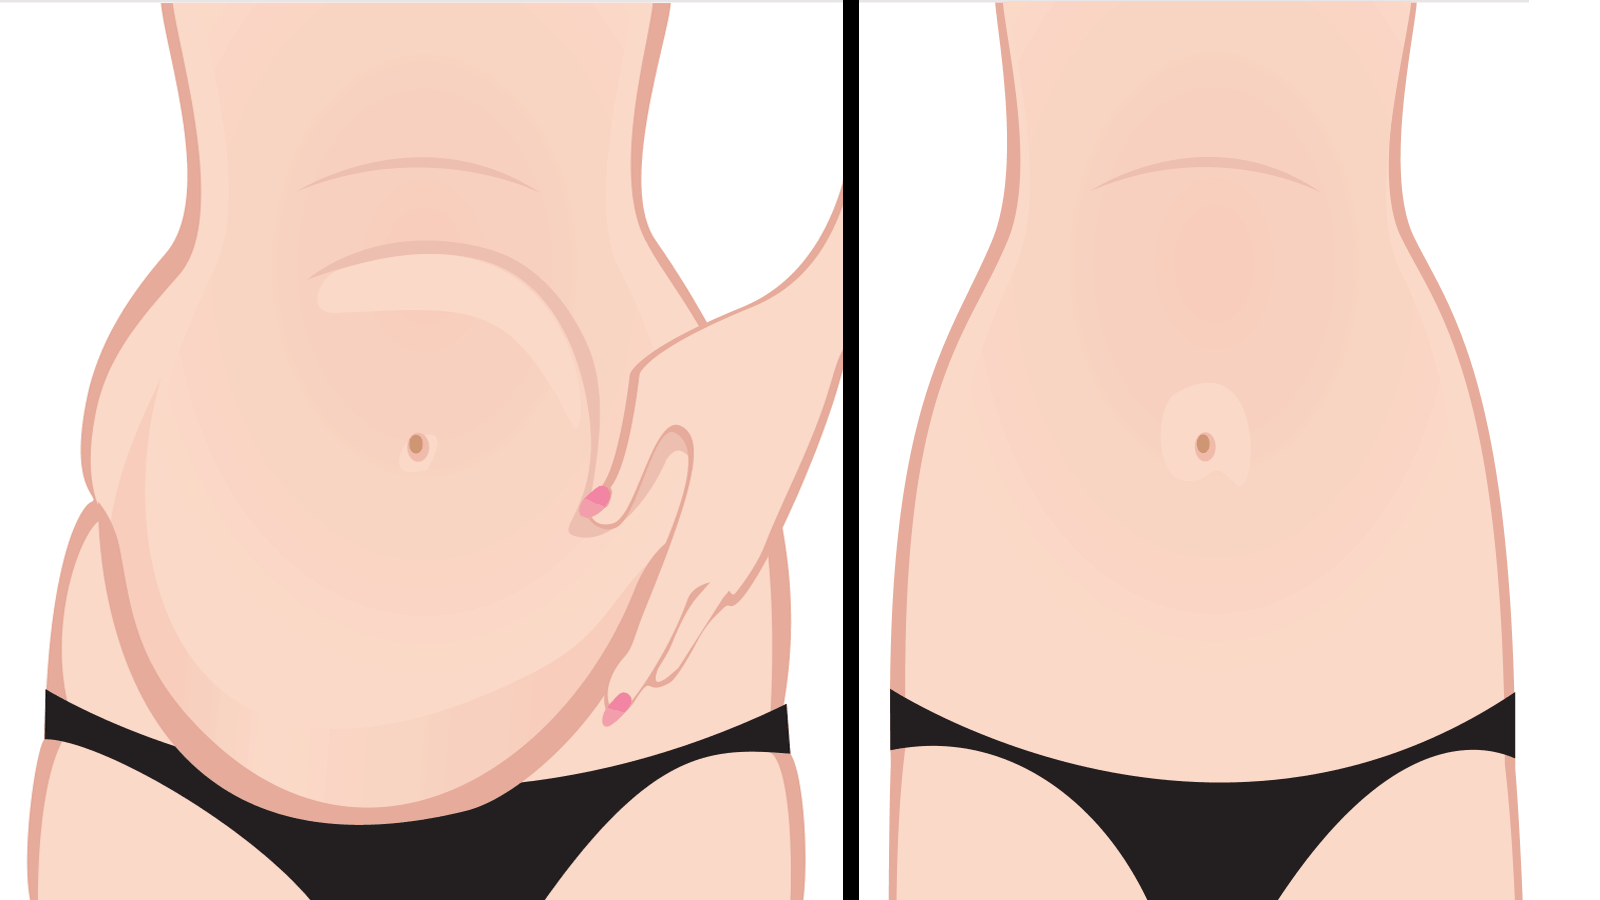 11 Ways to Get Rid of Belly Bloat Naturally